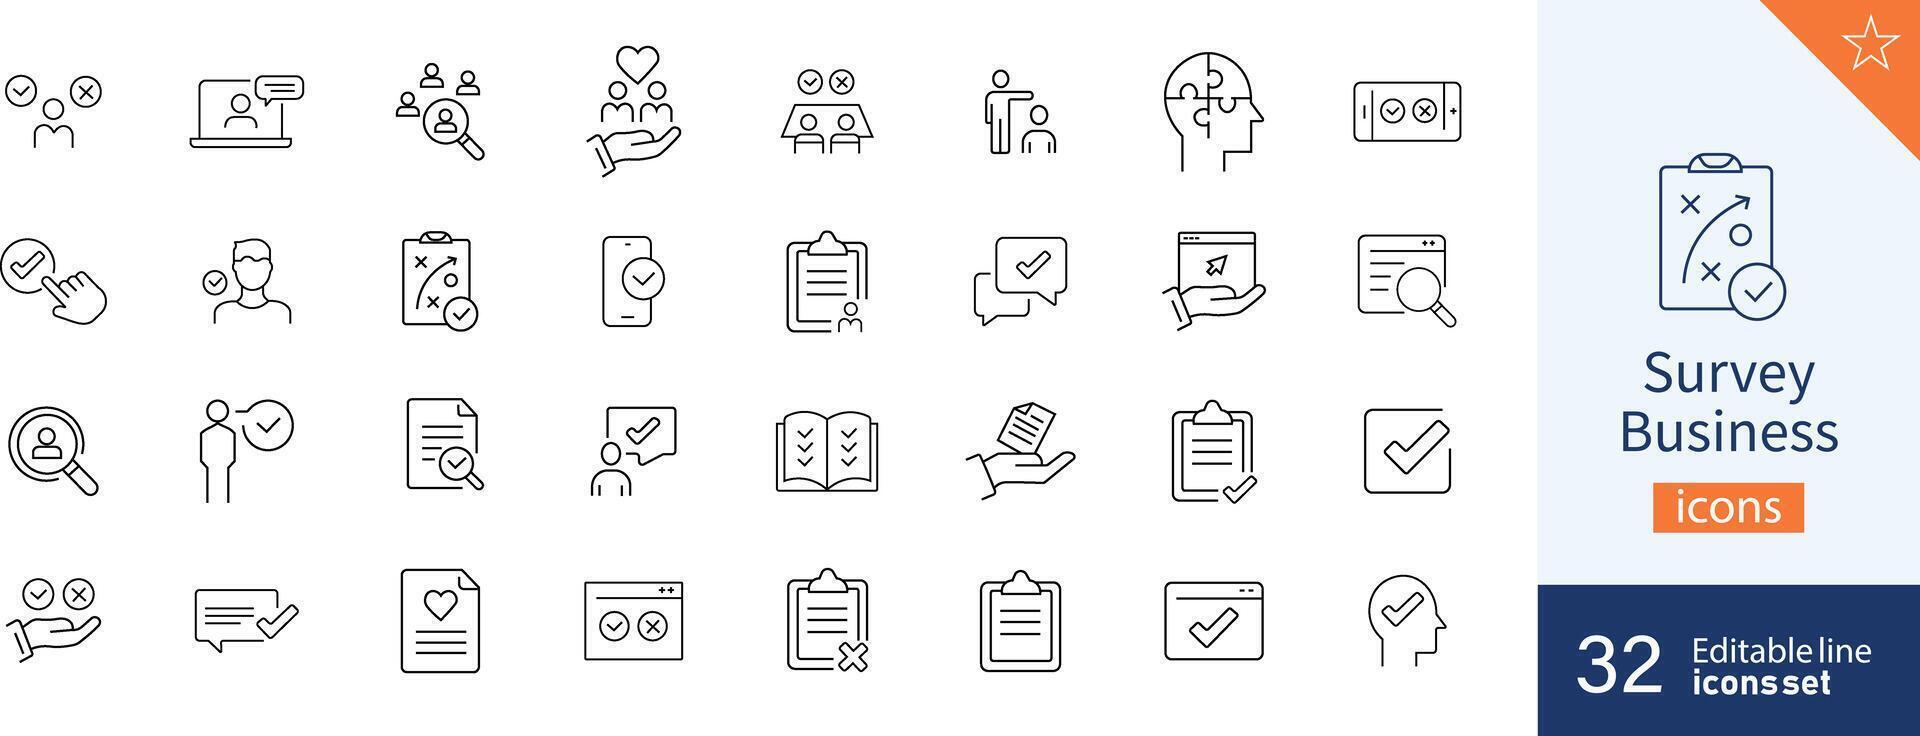 Survey icons Pixel perfect. Document, form, support, .... vector